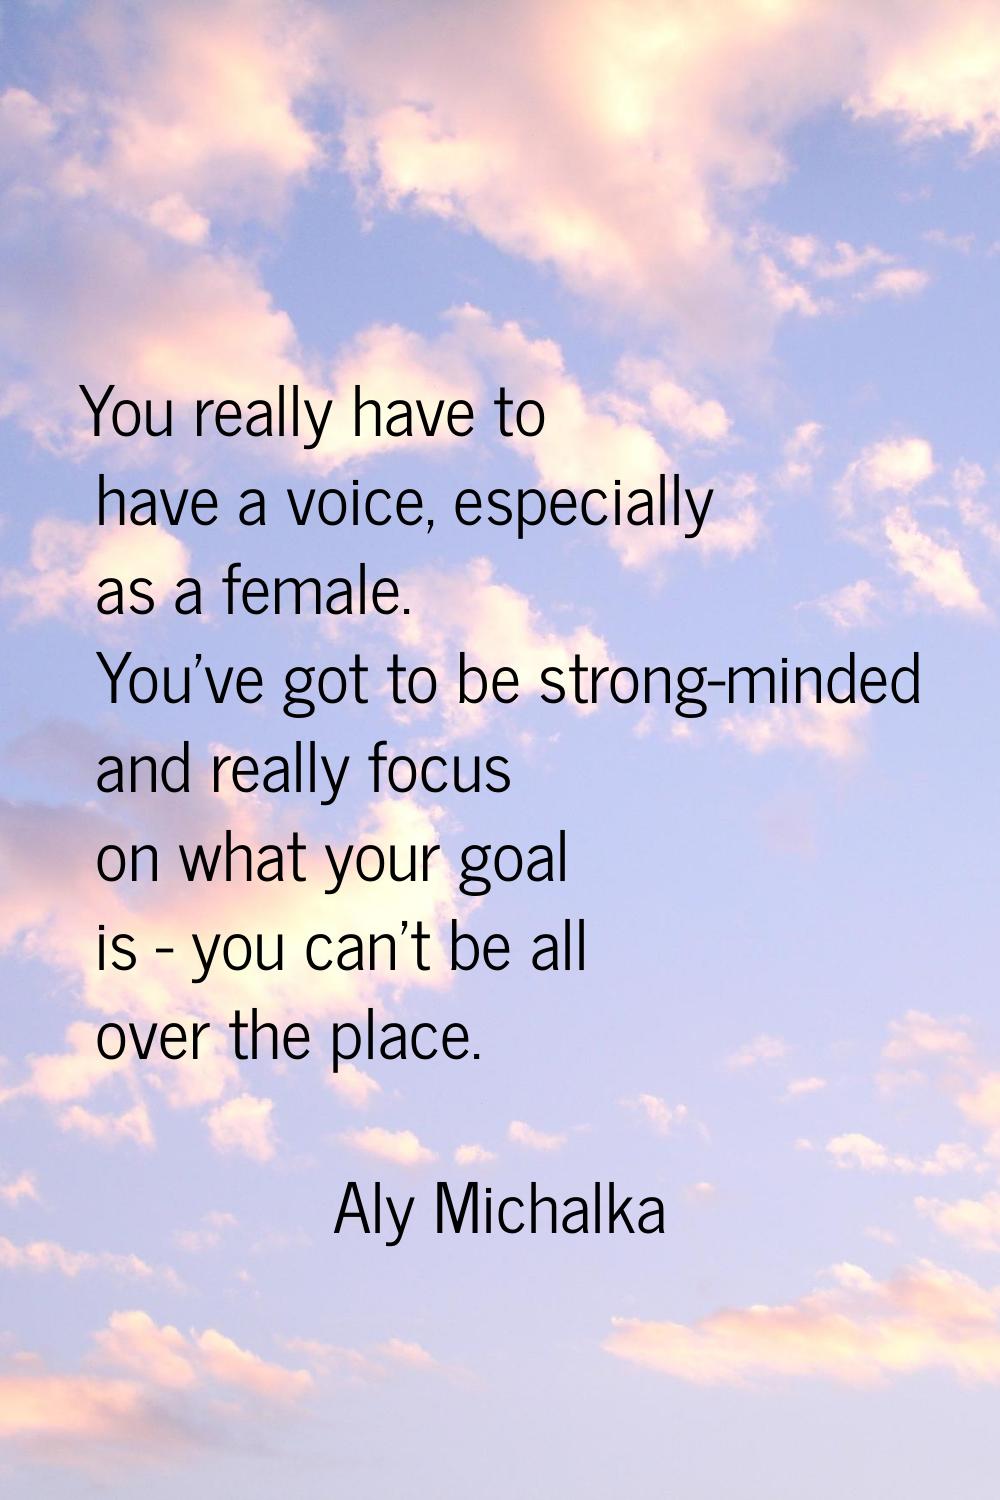 You really have to have a voice, especially as a female. You've got to be strong-minded and really 